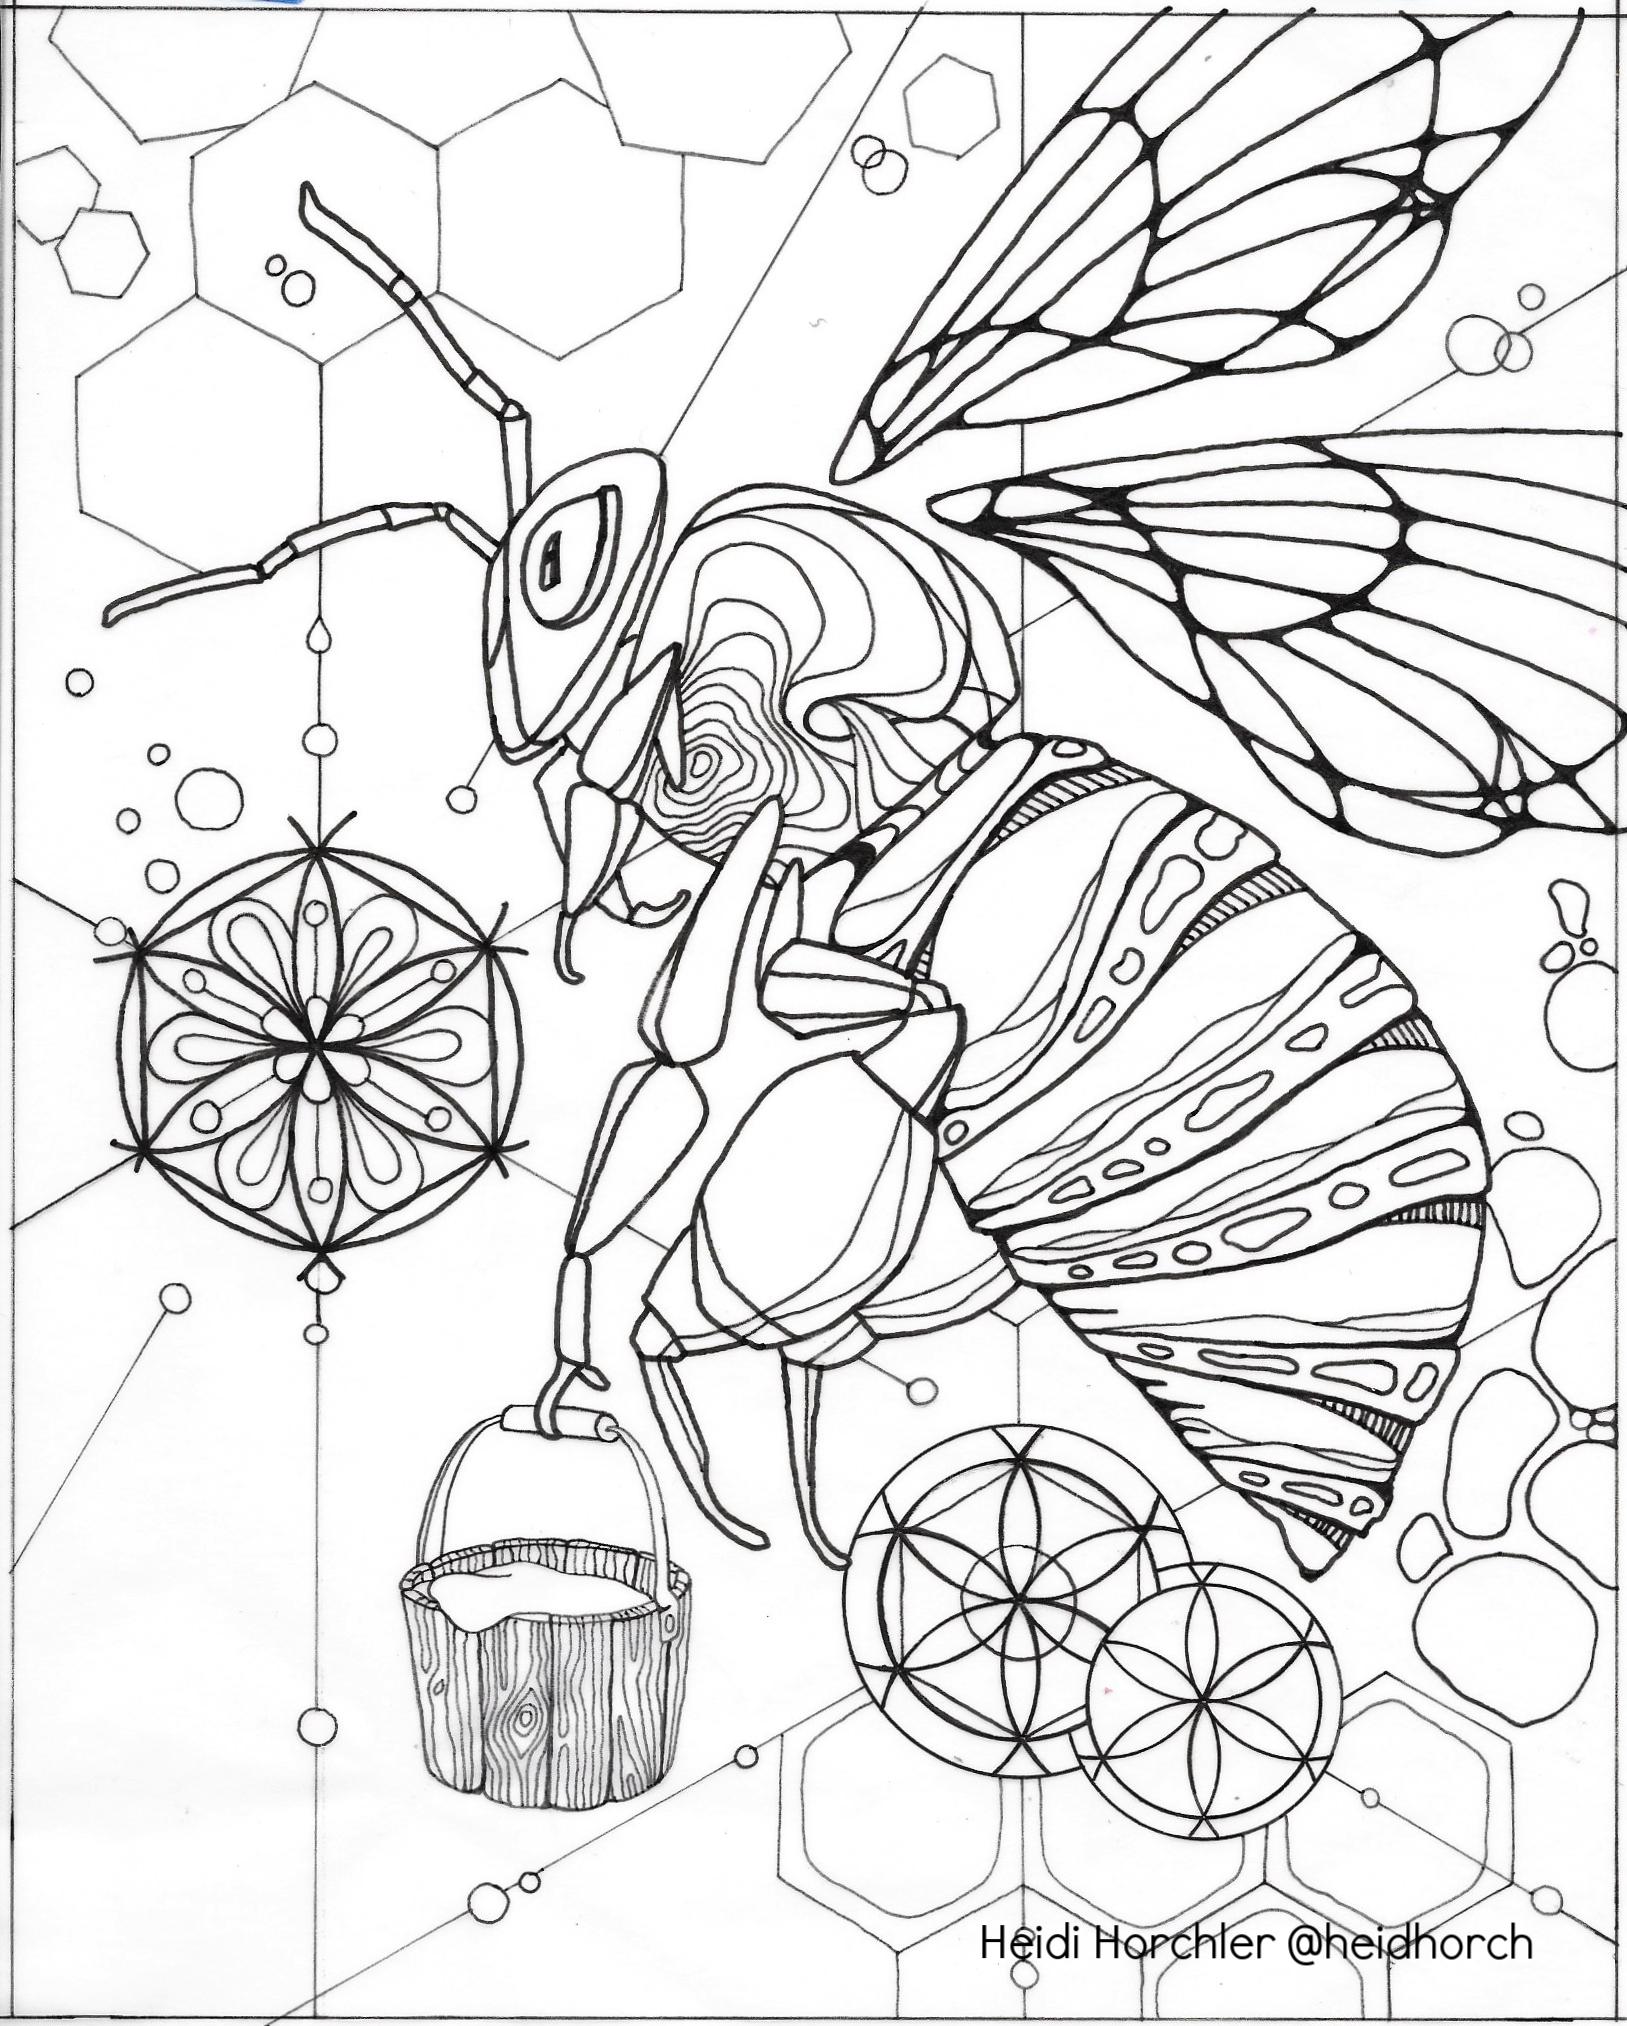 Bee - Daydream Odyssey coloring page